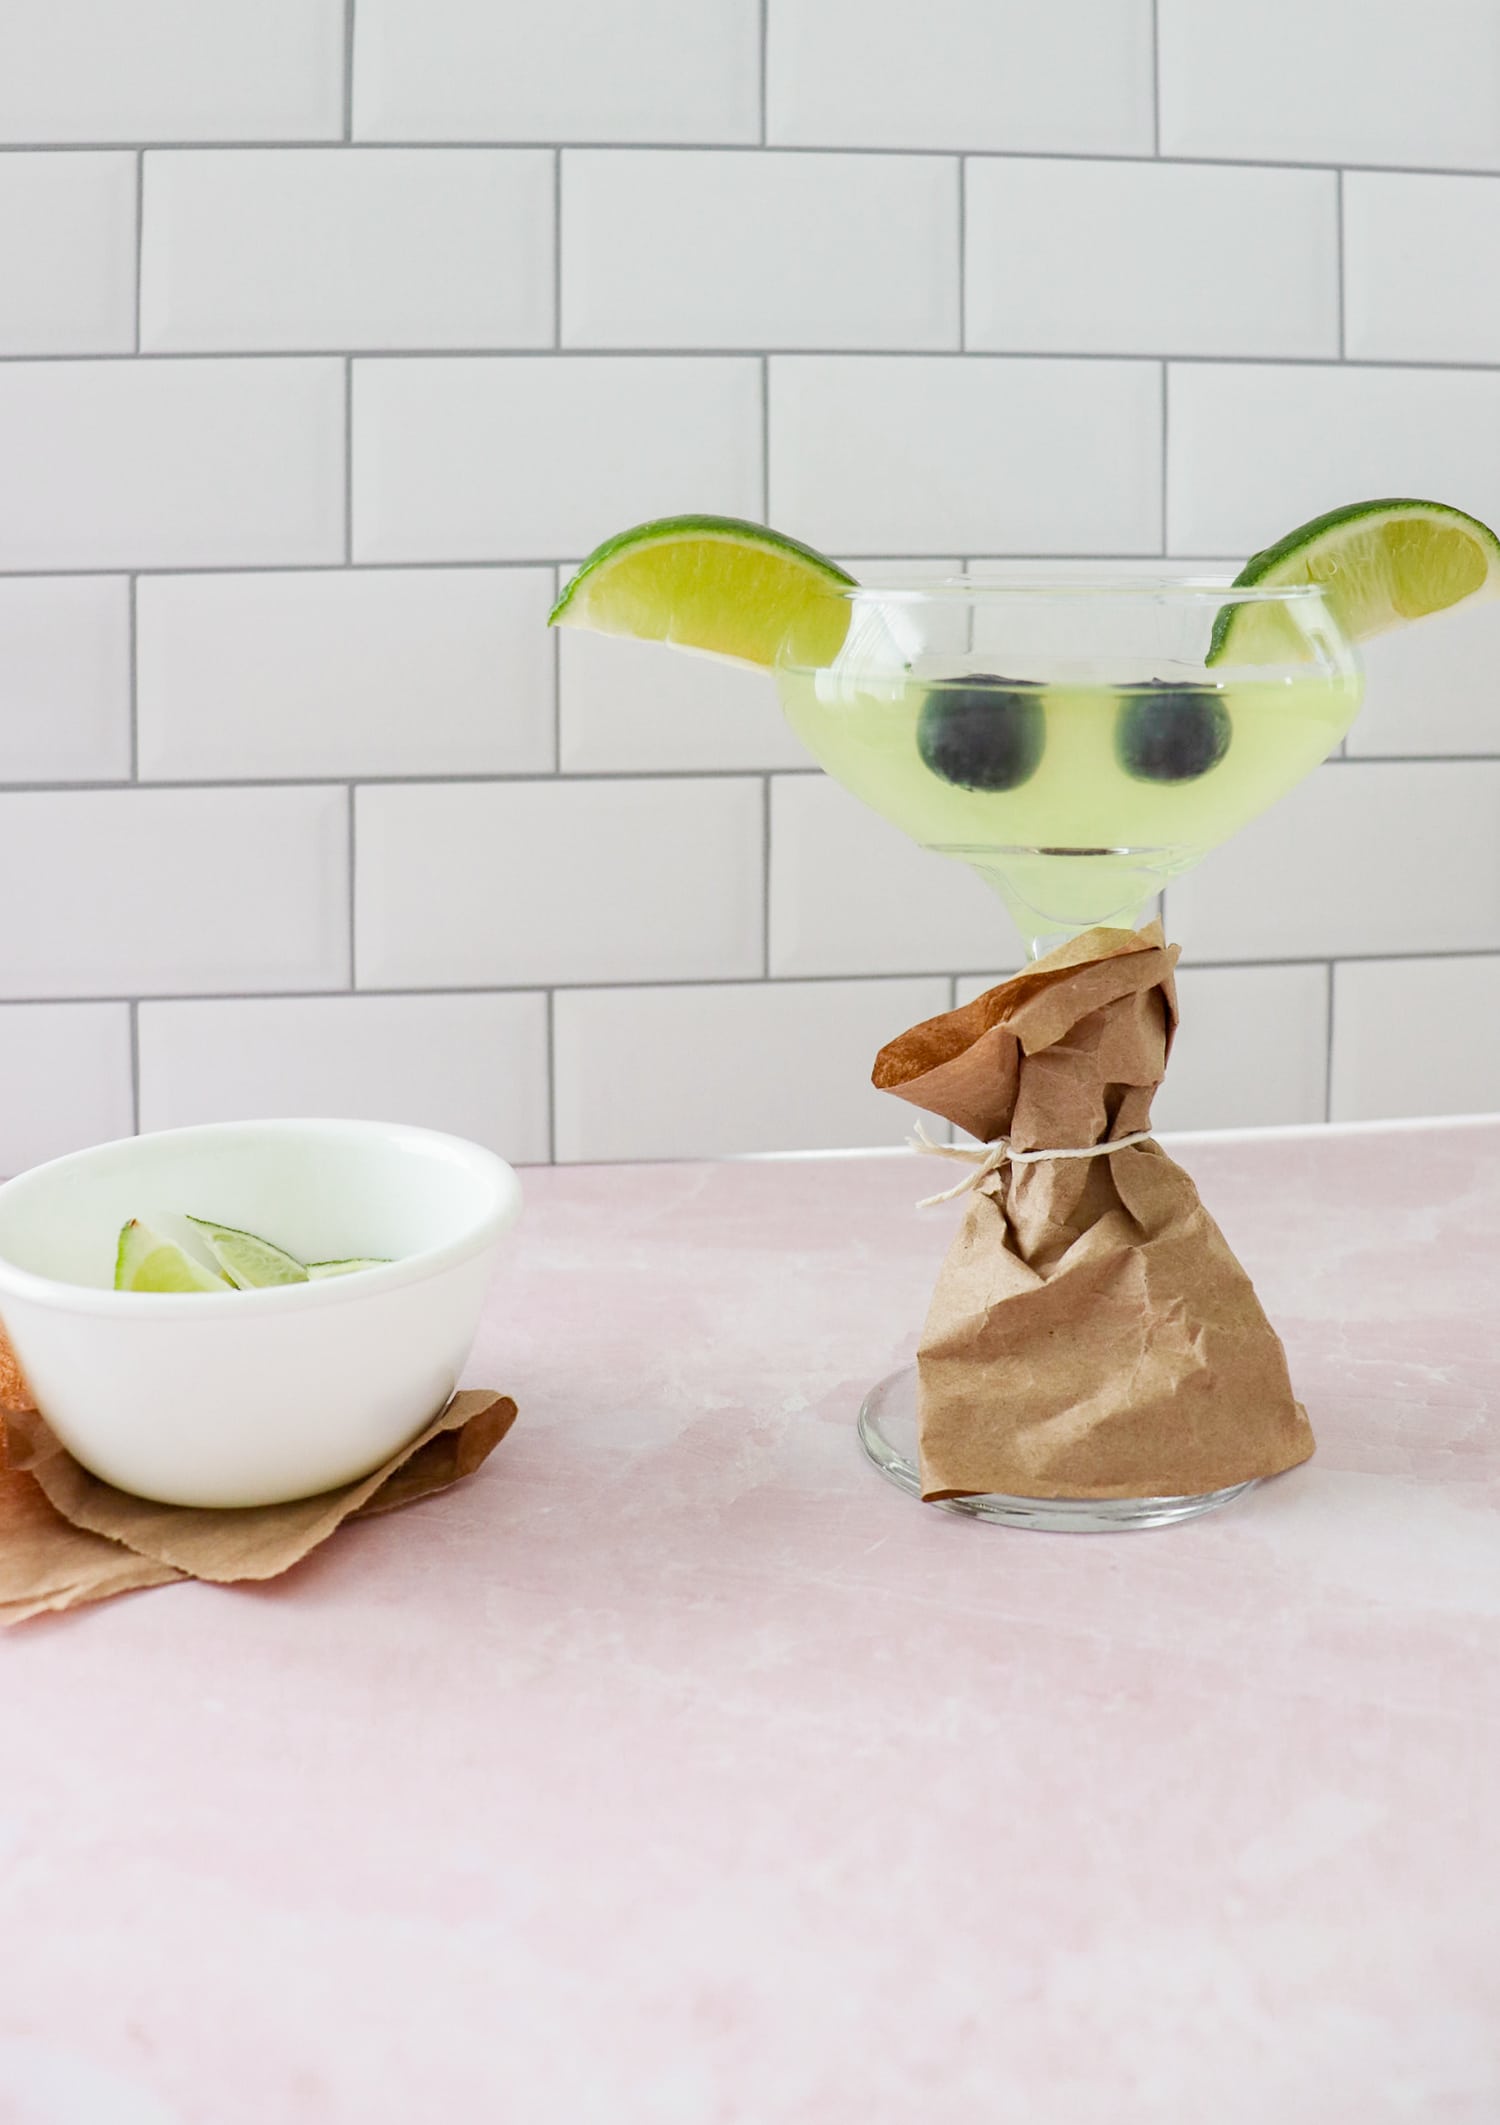 Completed Baby yoda cocktail. 